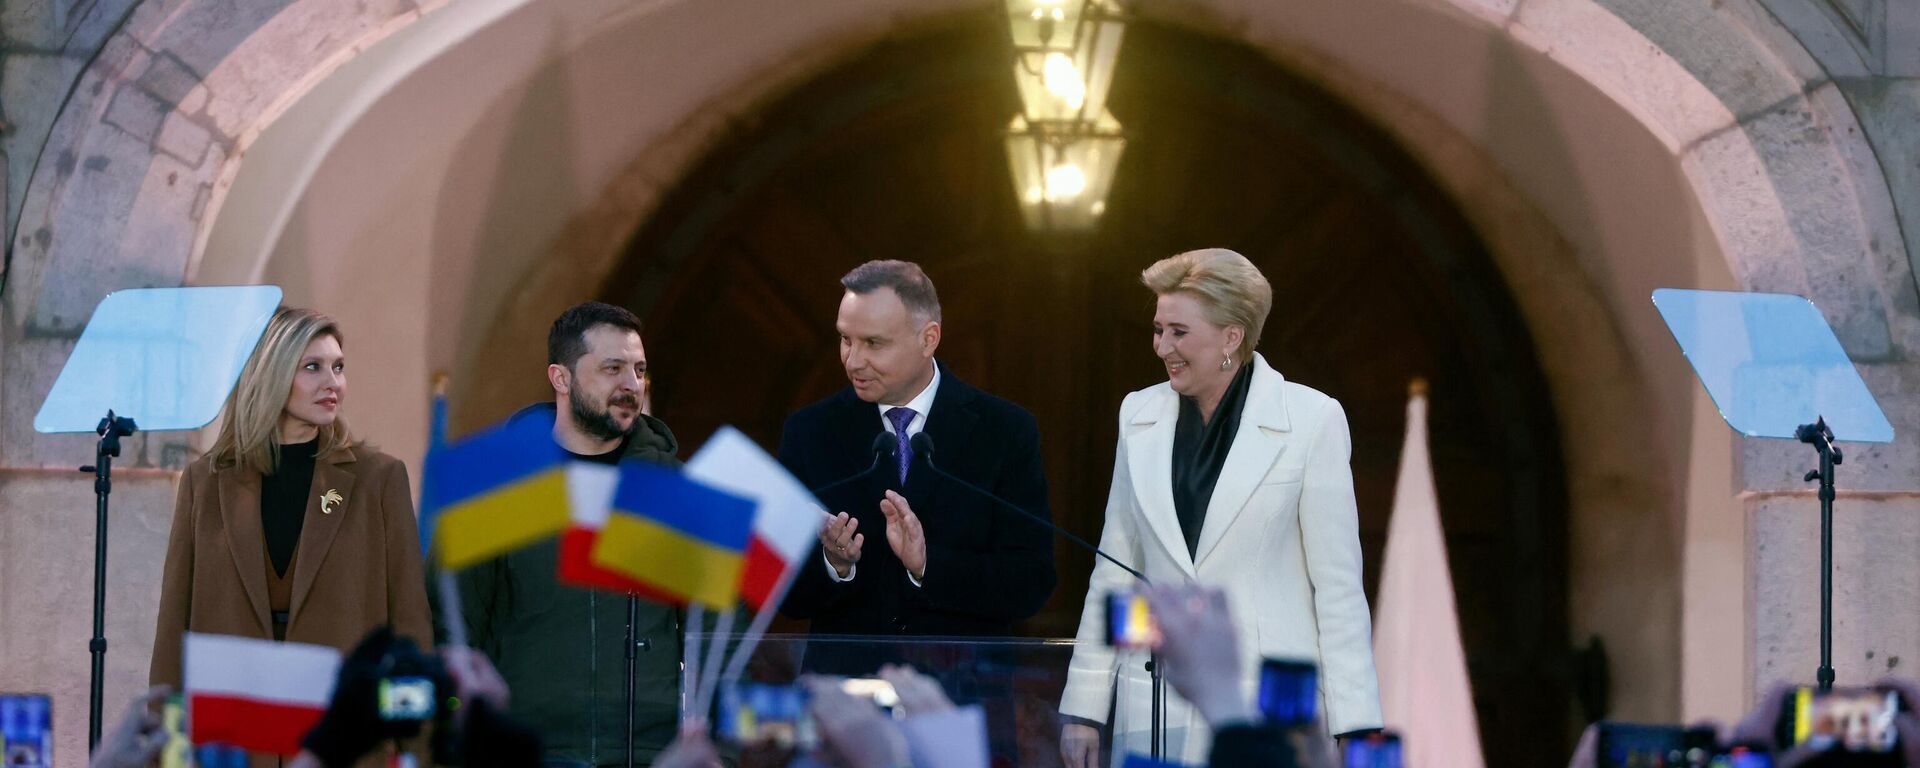 Polish President Andrzej Duda (2nd R) and his wife Agata (R) wave to wellwishers alongside Ukrainian President Volodymyr Zelensky (2nd L) and his wife Olena (L) in the courtyard of the Royal Castle in Warsaw, Poland, on April 5, 2023. - Sputnik International, 1920, 21.09.2023